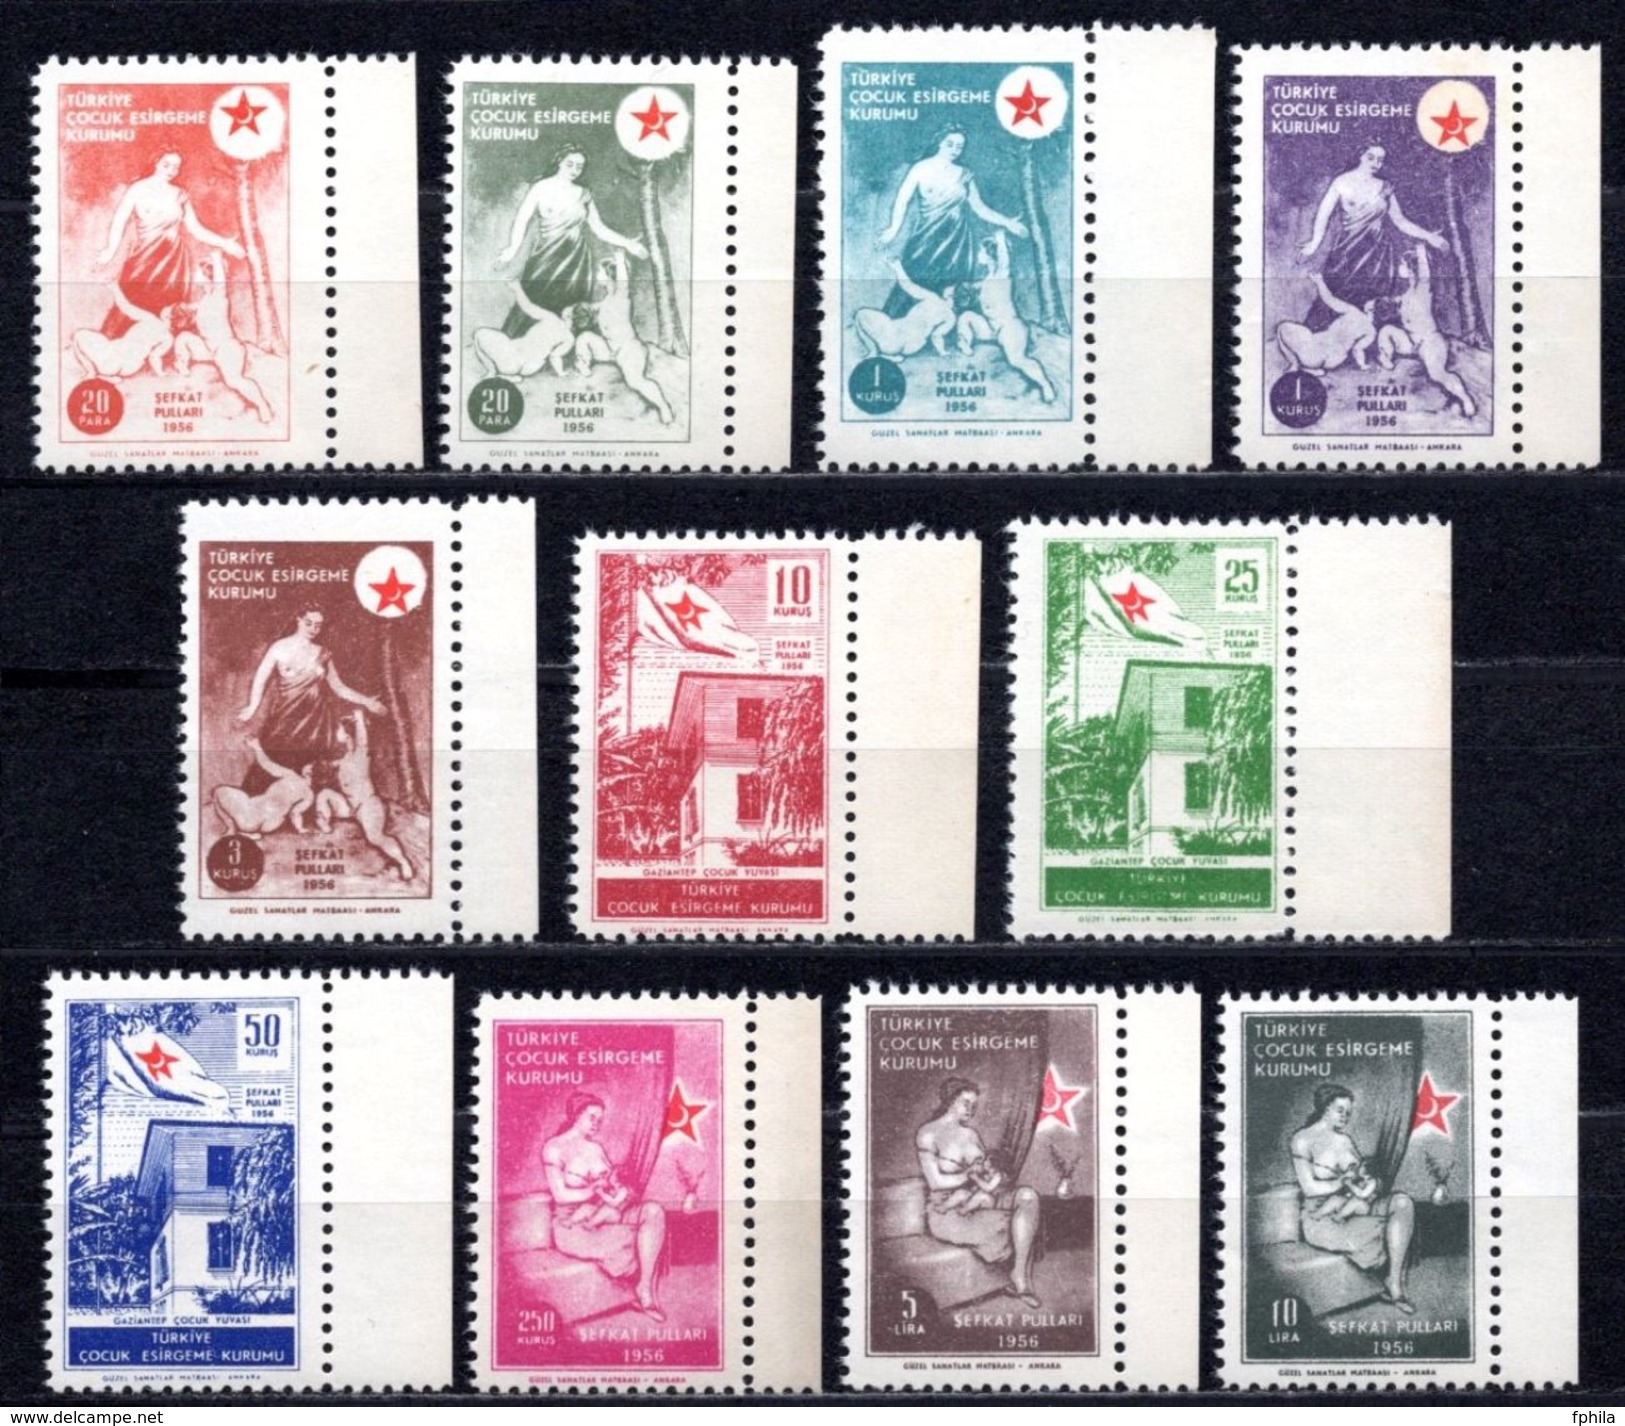 1956 TURKEY TURKISH SOCIETY FOR THE PROTECTION OF CHILDREN CHARITY STAMPS MNH ** - Francobolli Di Beneficenza